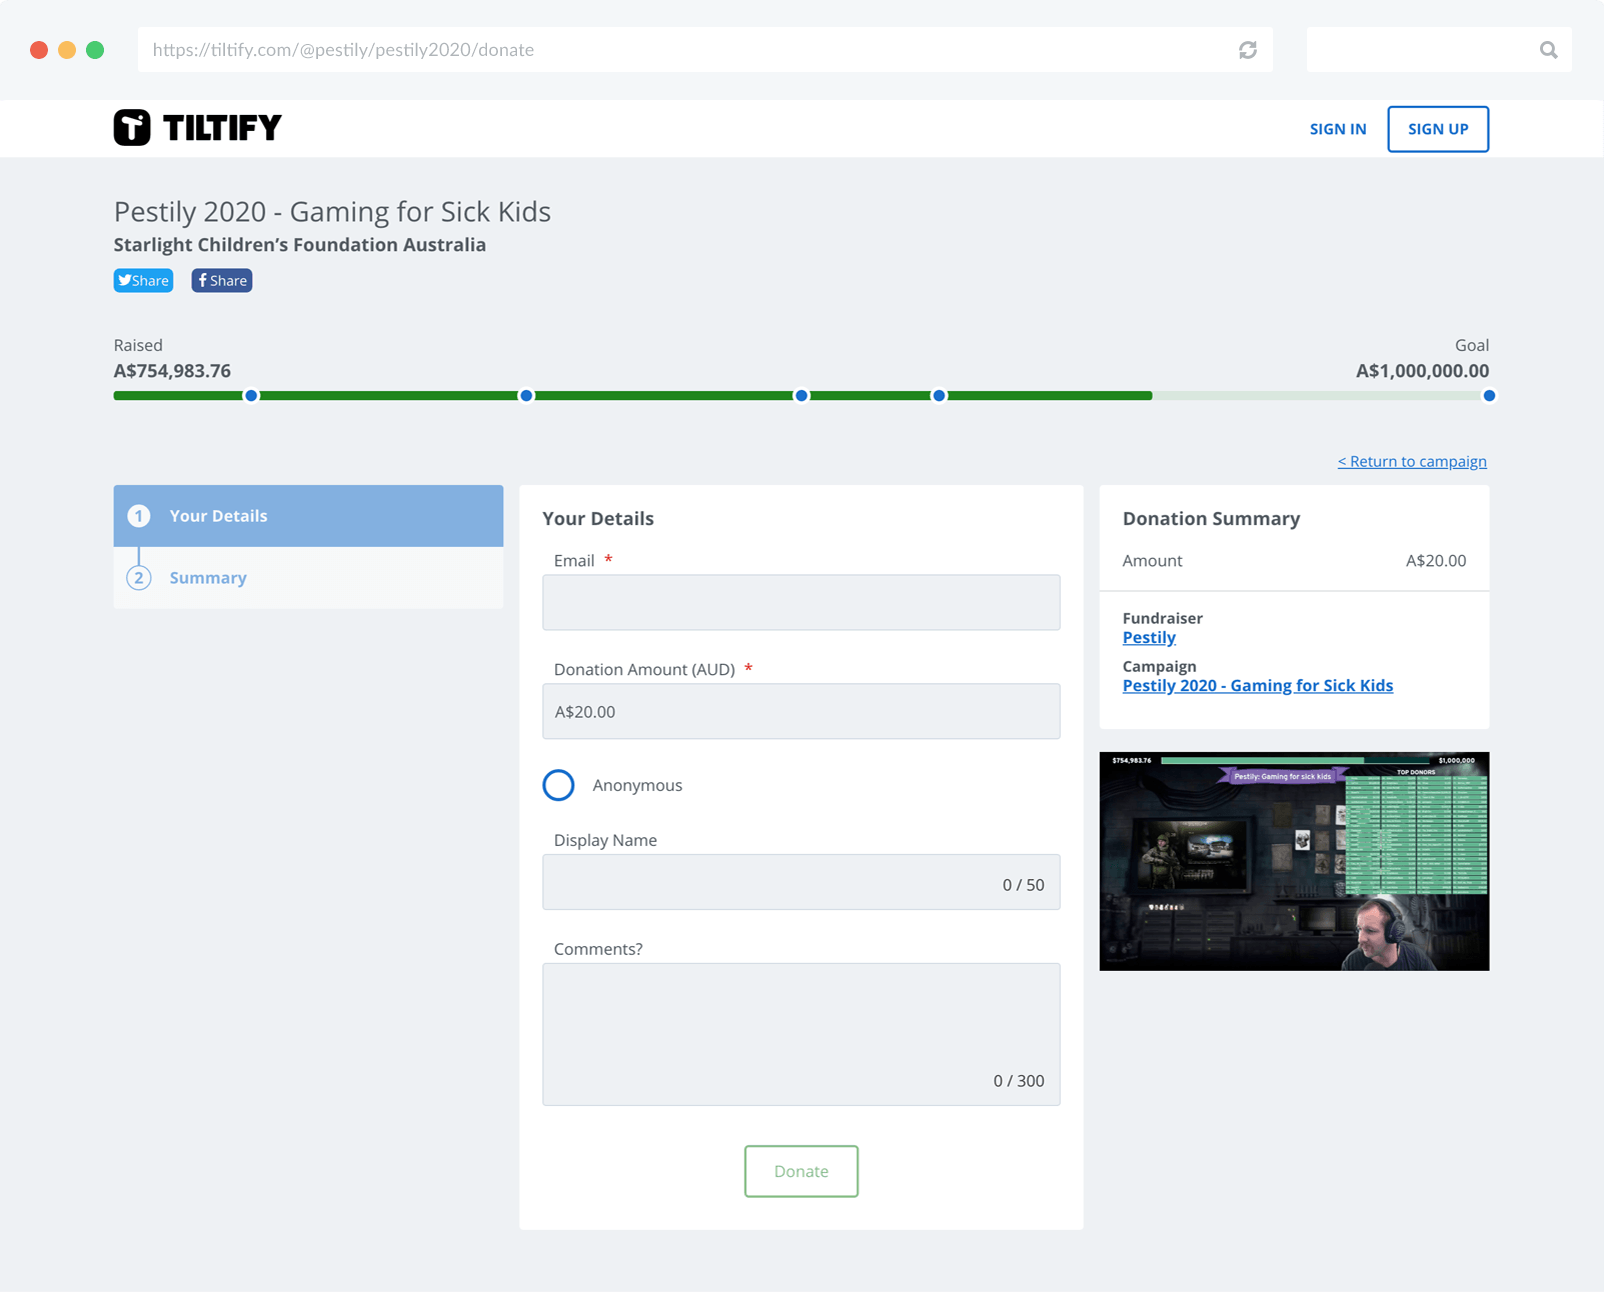 Pestily's 1M donation campaign on Tiltify